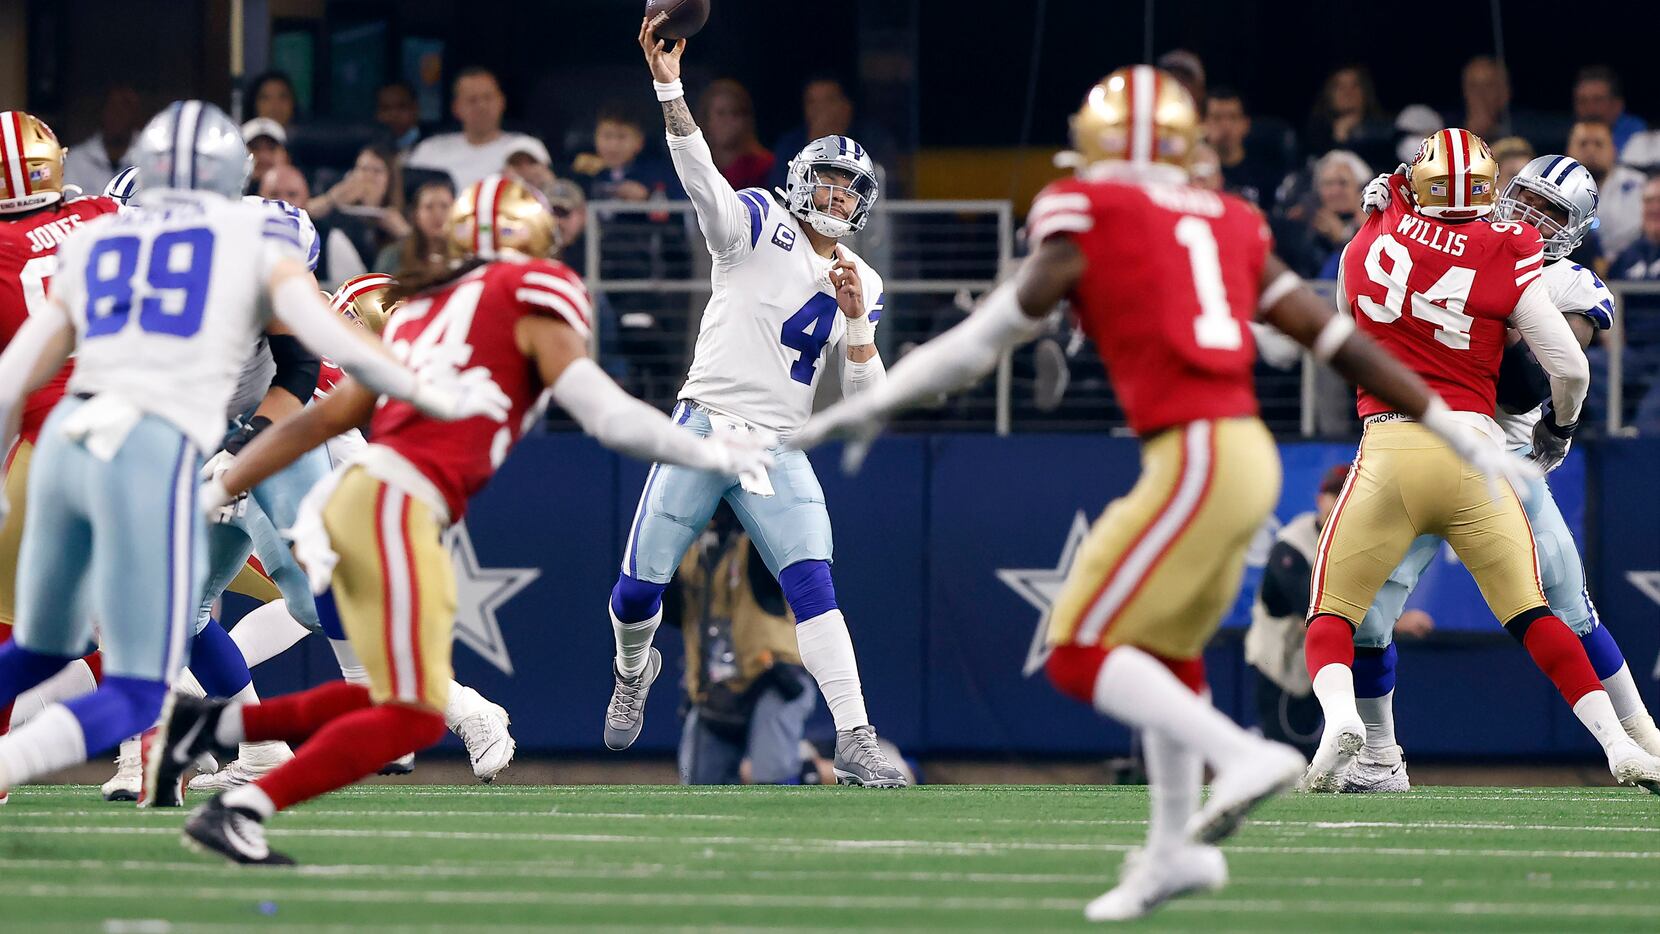 Hot ticket: Cowboys-49ers is the NFL's best-selling divisional round game